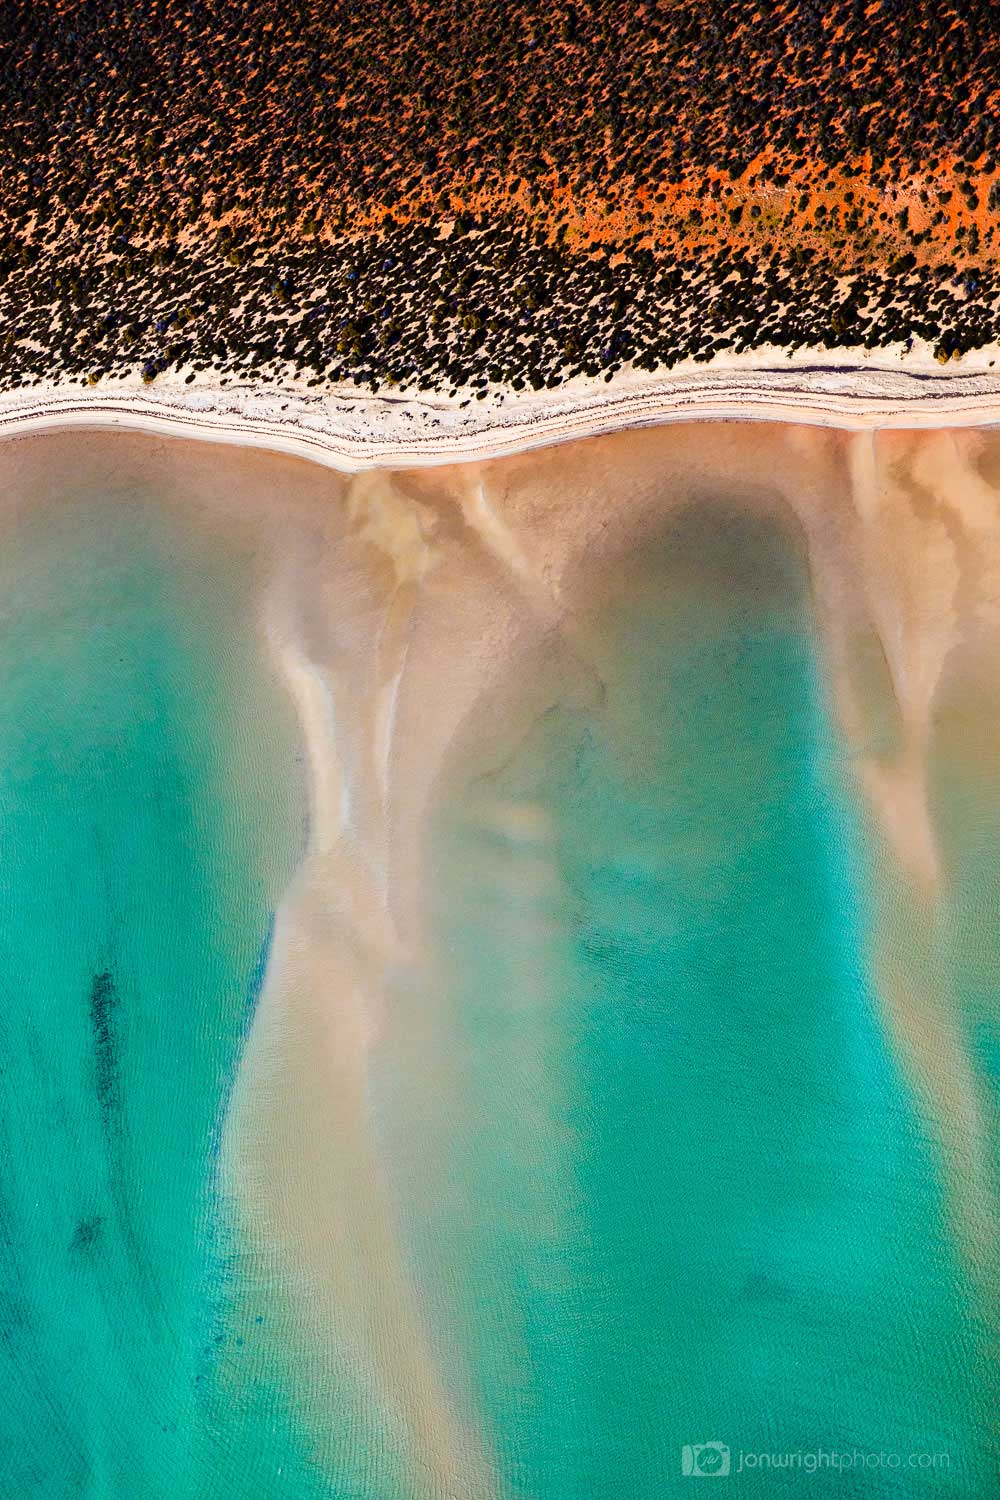 Red and Turquoise aerial abstract image of ocean